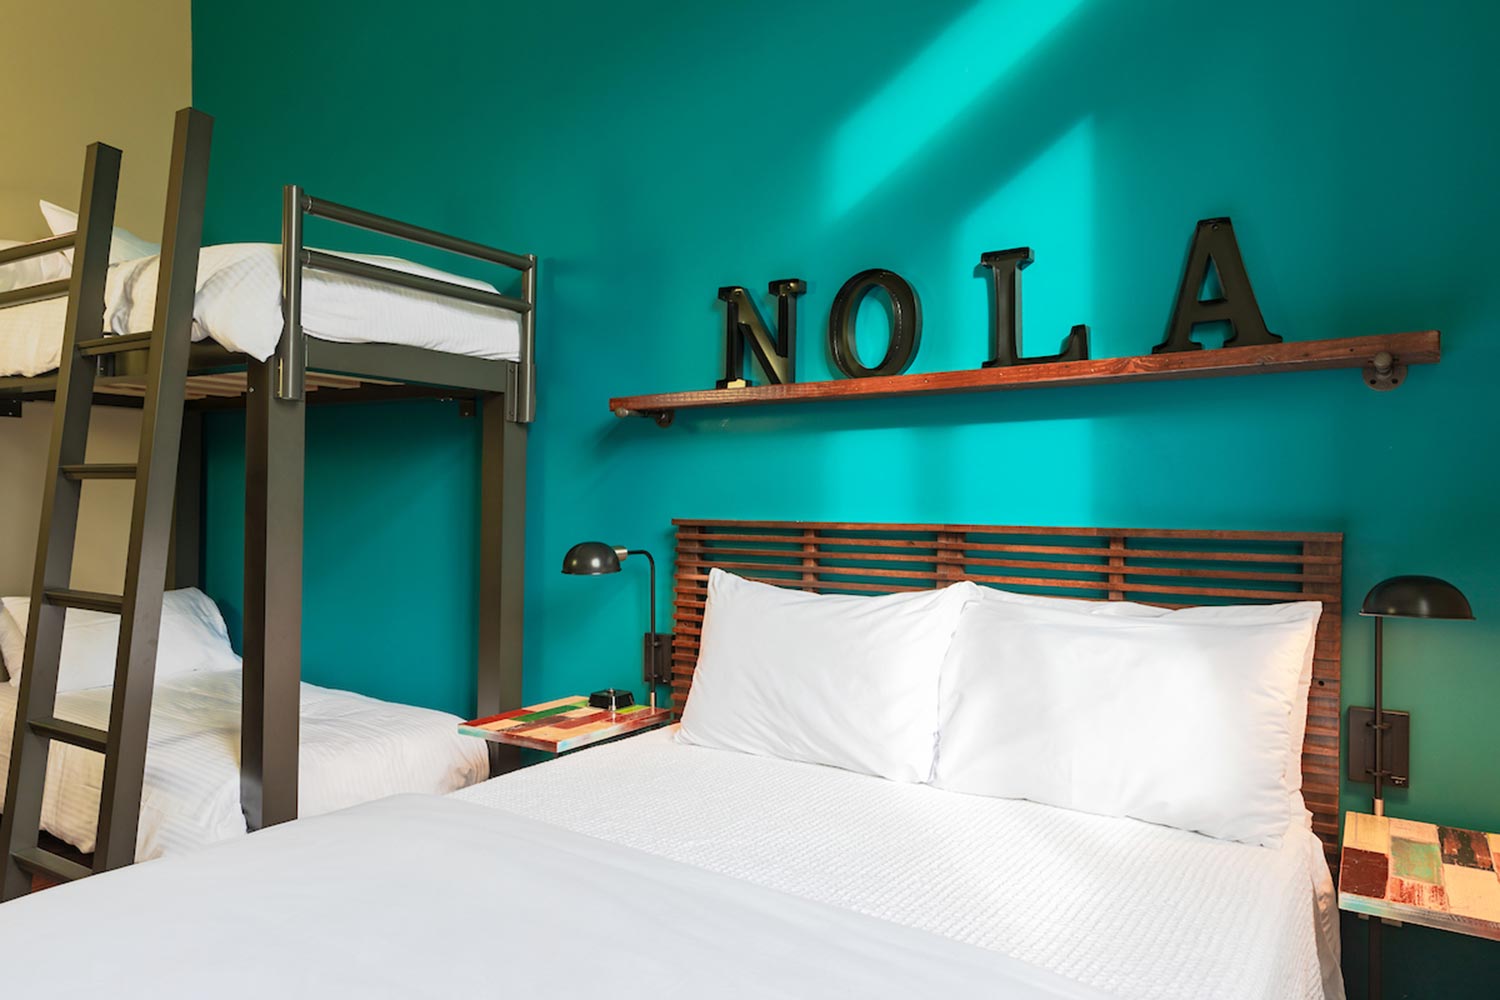 A private family room at HI New Orleans hostel with turquoise-colored walls and one freshly made full-sized bed with crisp white linens and one set of twin-sized bunk beds with crisp white linens.